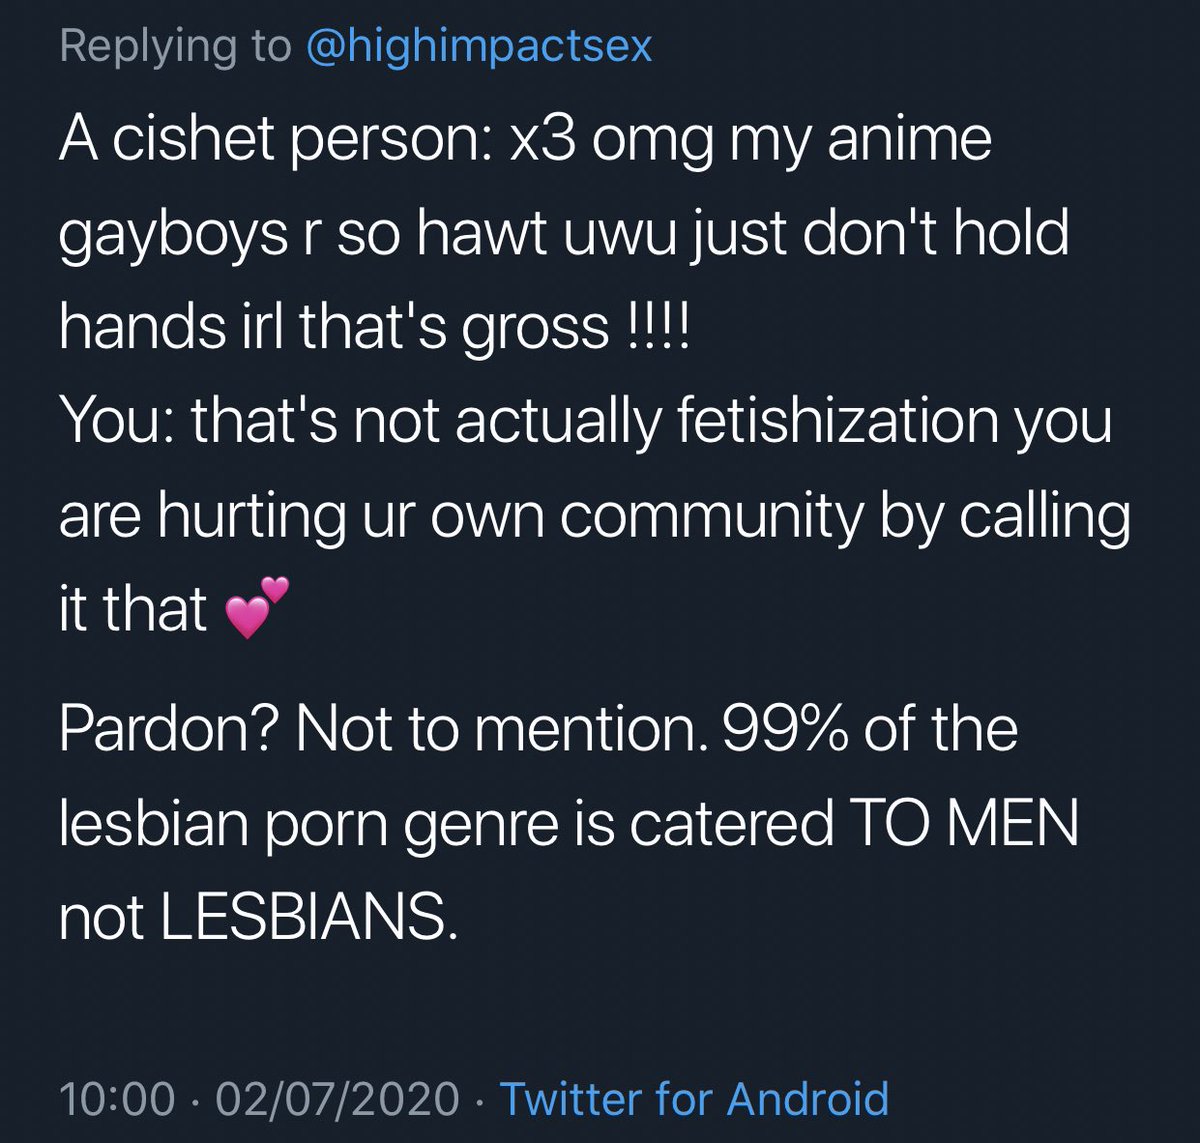 shit like this is why i firmly believe the “fetishizing” argument is defeatistif self-defense means adding an imaginary statistic number and letting The Men decide what’s lesbian porn, i give upeveryone, let’s give up on the concept of queer pornthere’s no porn for queers